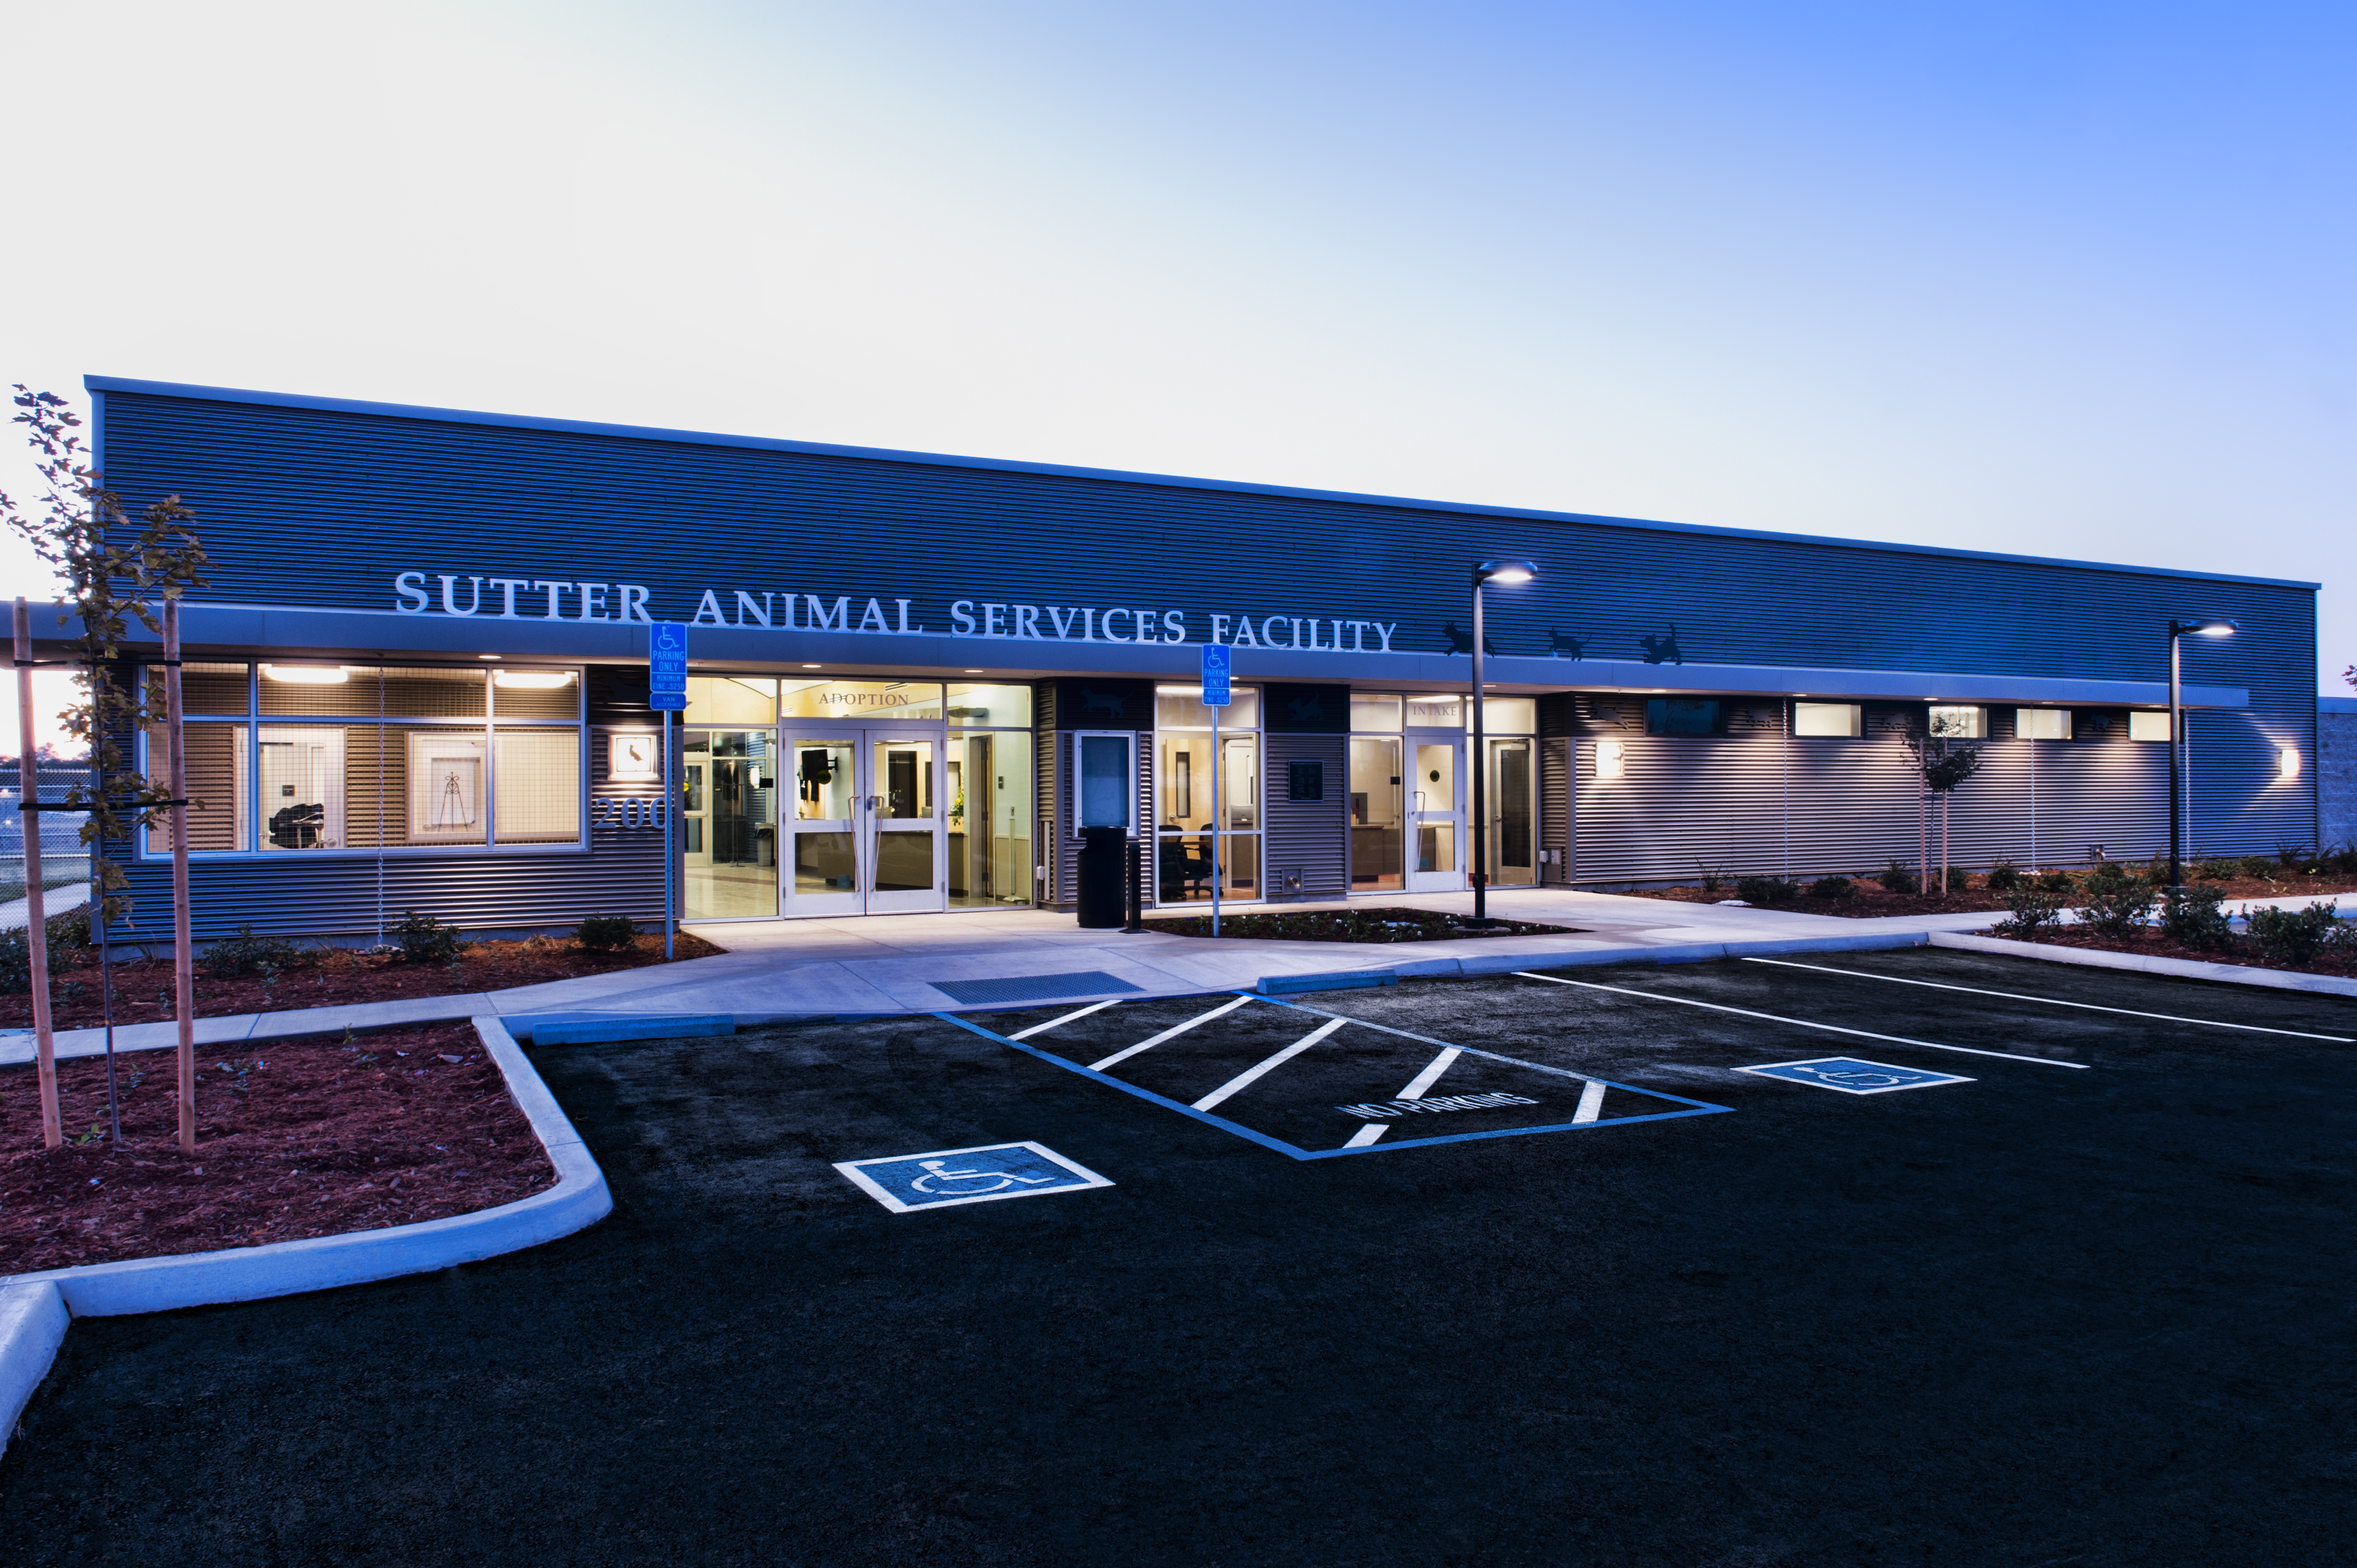 Sutter Animal Services Facility